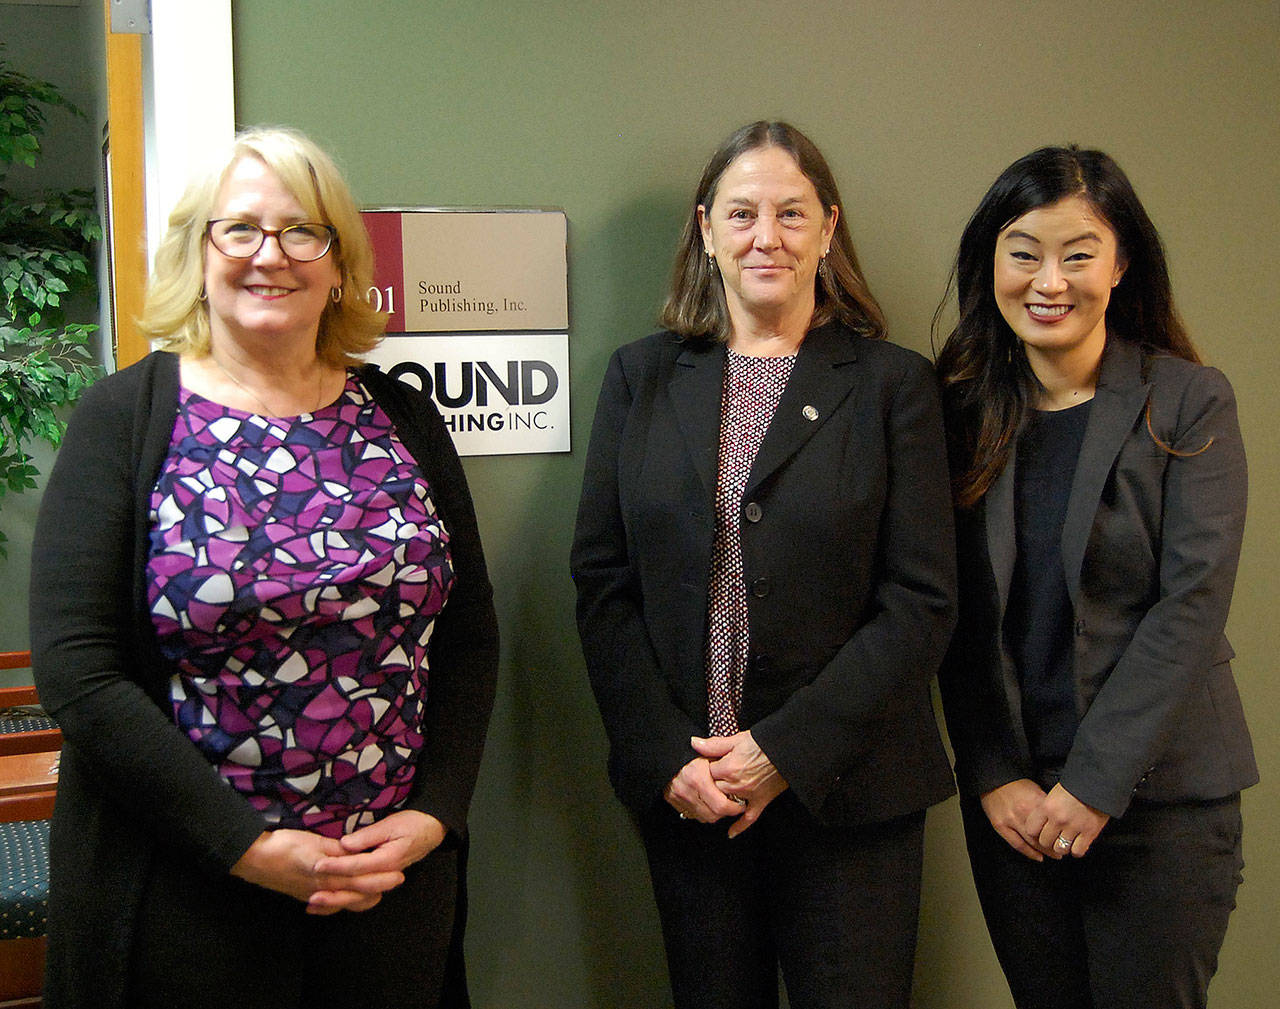 Washington State Auditor Pat McCarthy, Deputy State Auditor Keri Rooney and Program Manager Wendy W. Choy. Katie Metzger, Reporter Newspapers